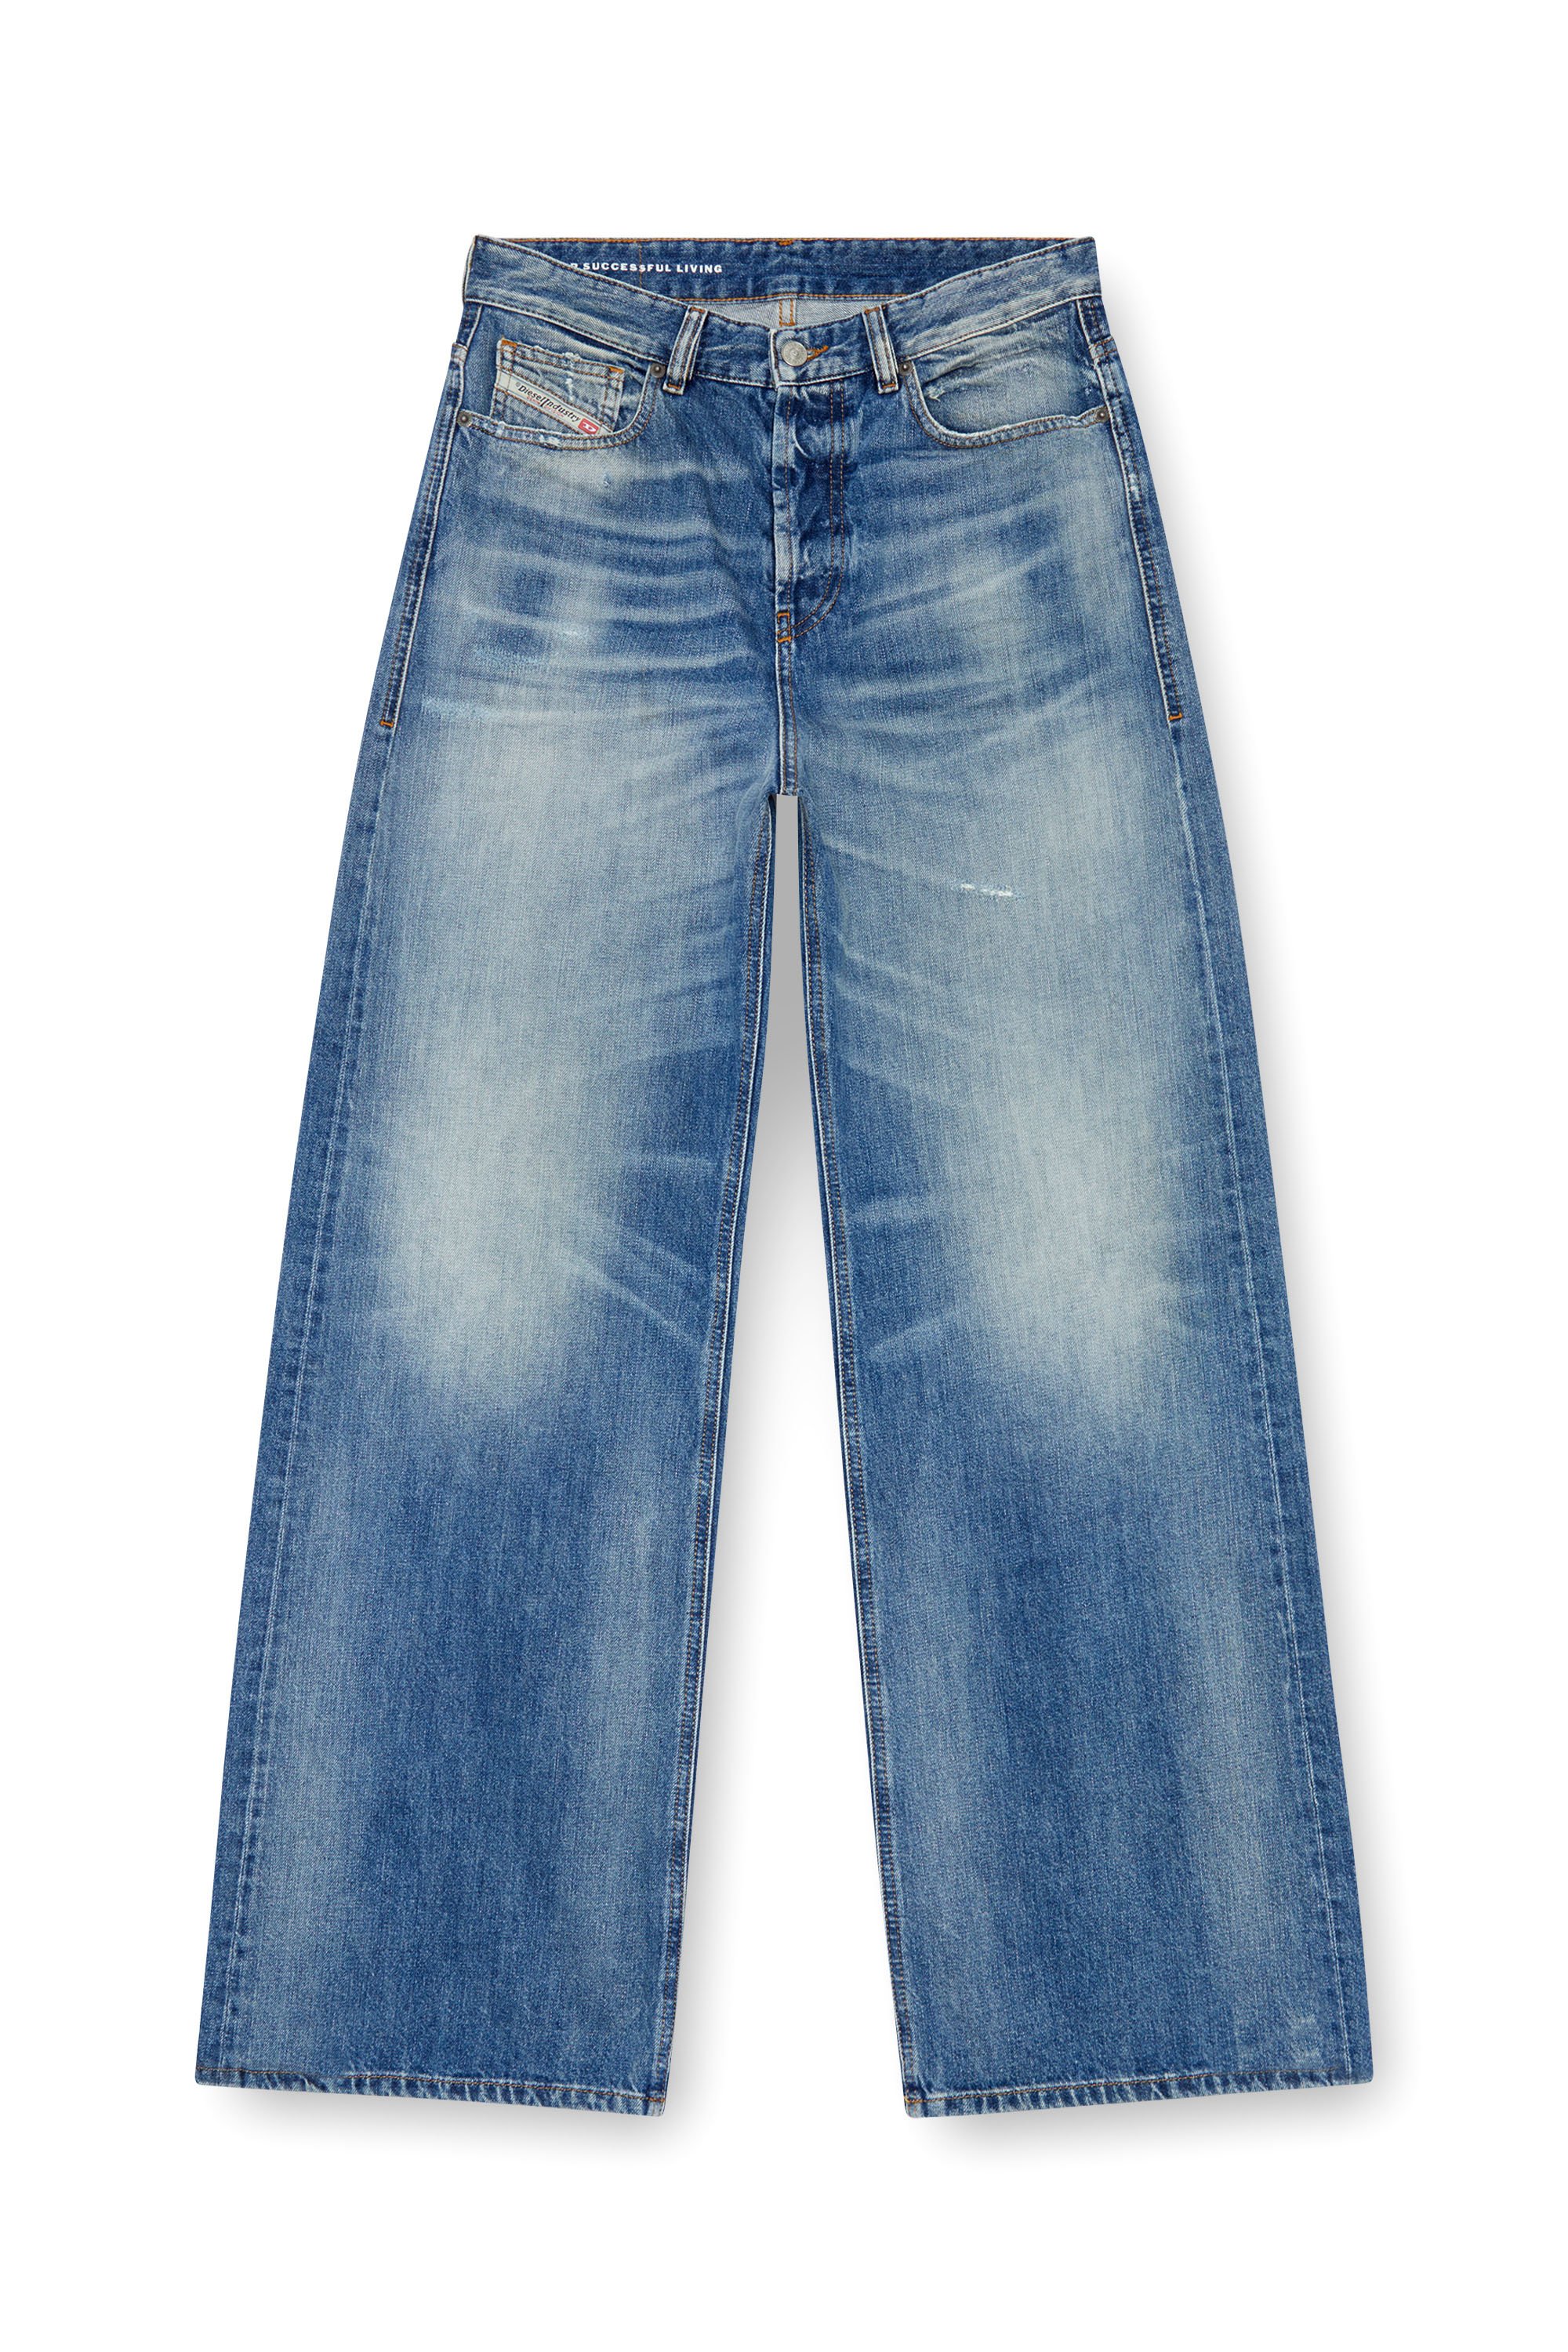 Diesel - Straight Jeans 1996 D-Sire 09J86, Mujer Straight Jeans - 1996 D-Sire in Azul marino - Image 3